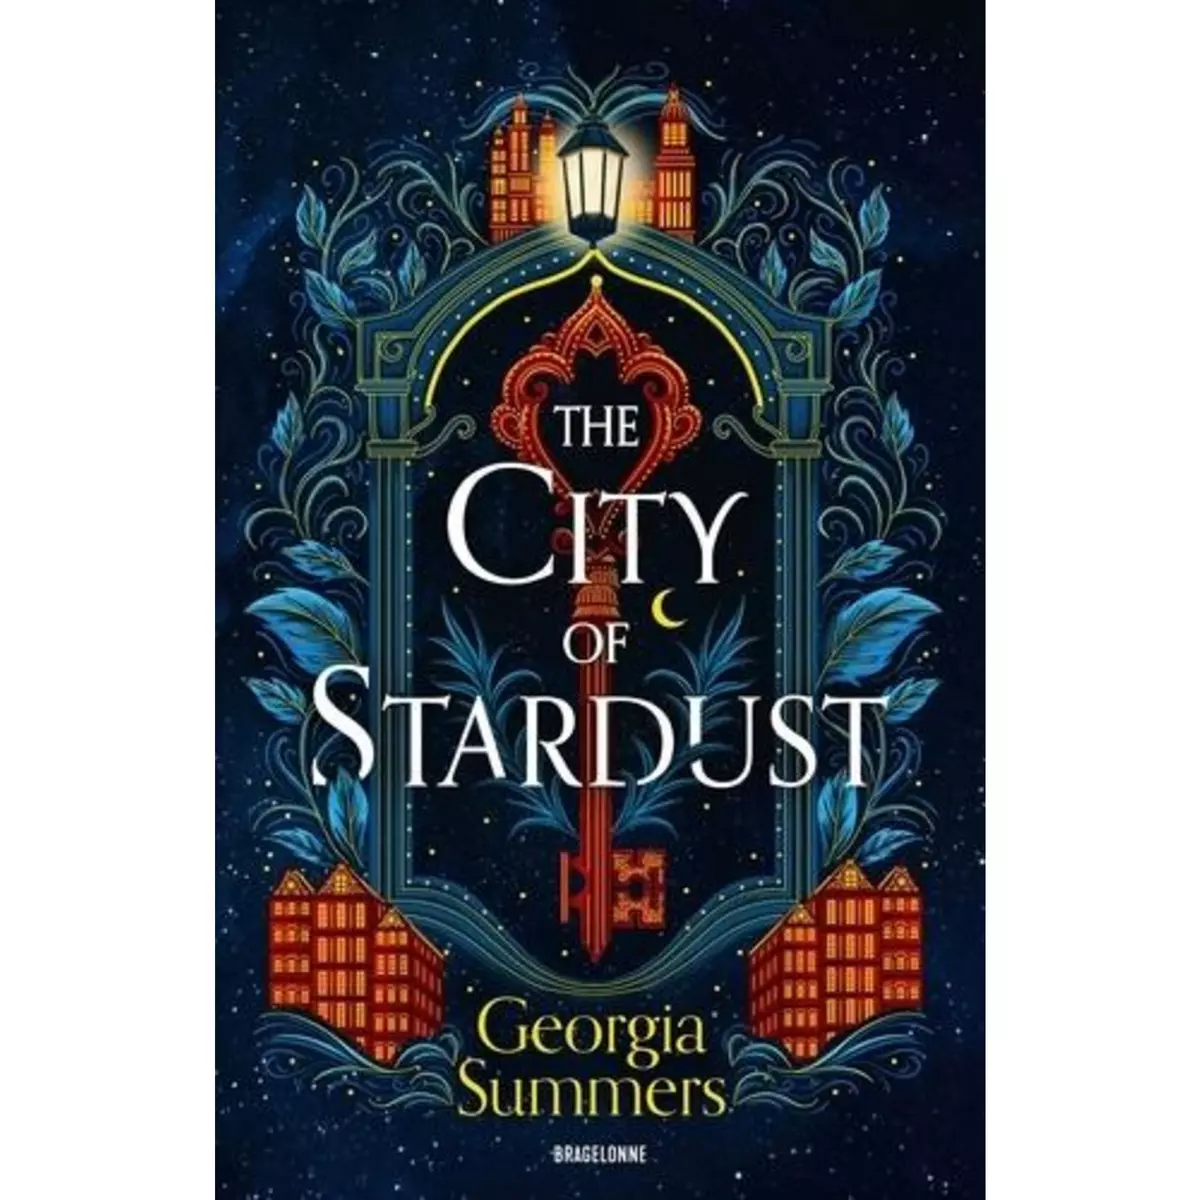  THE CITY OF STARDUST, Summers Georgia